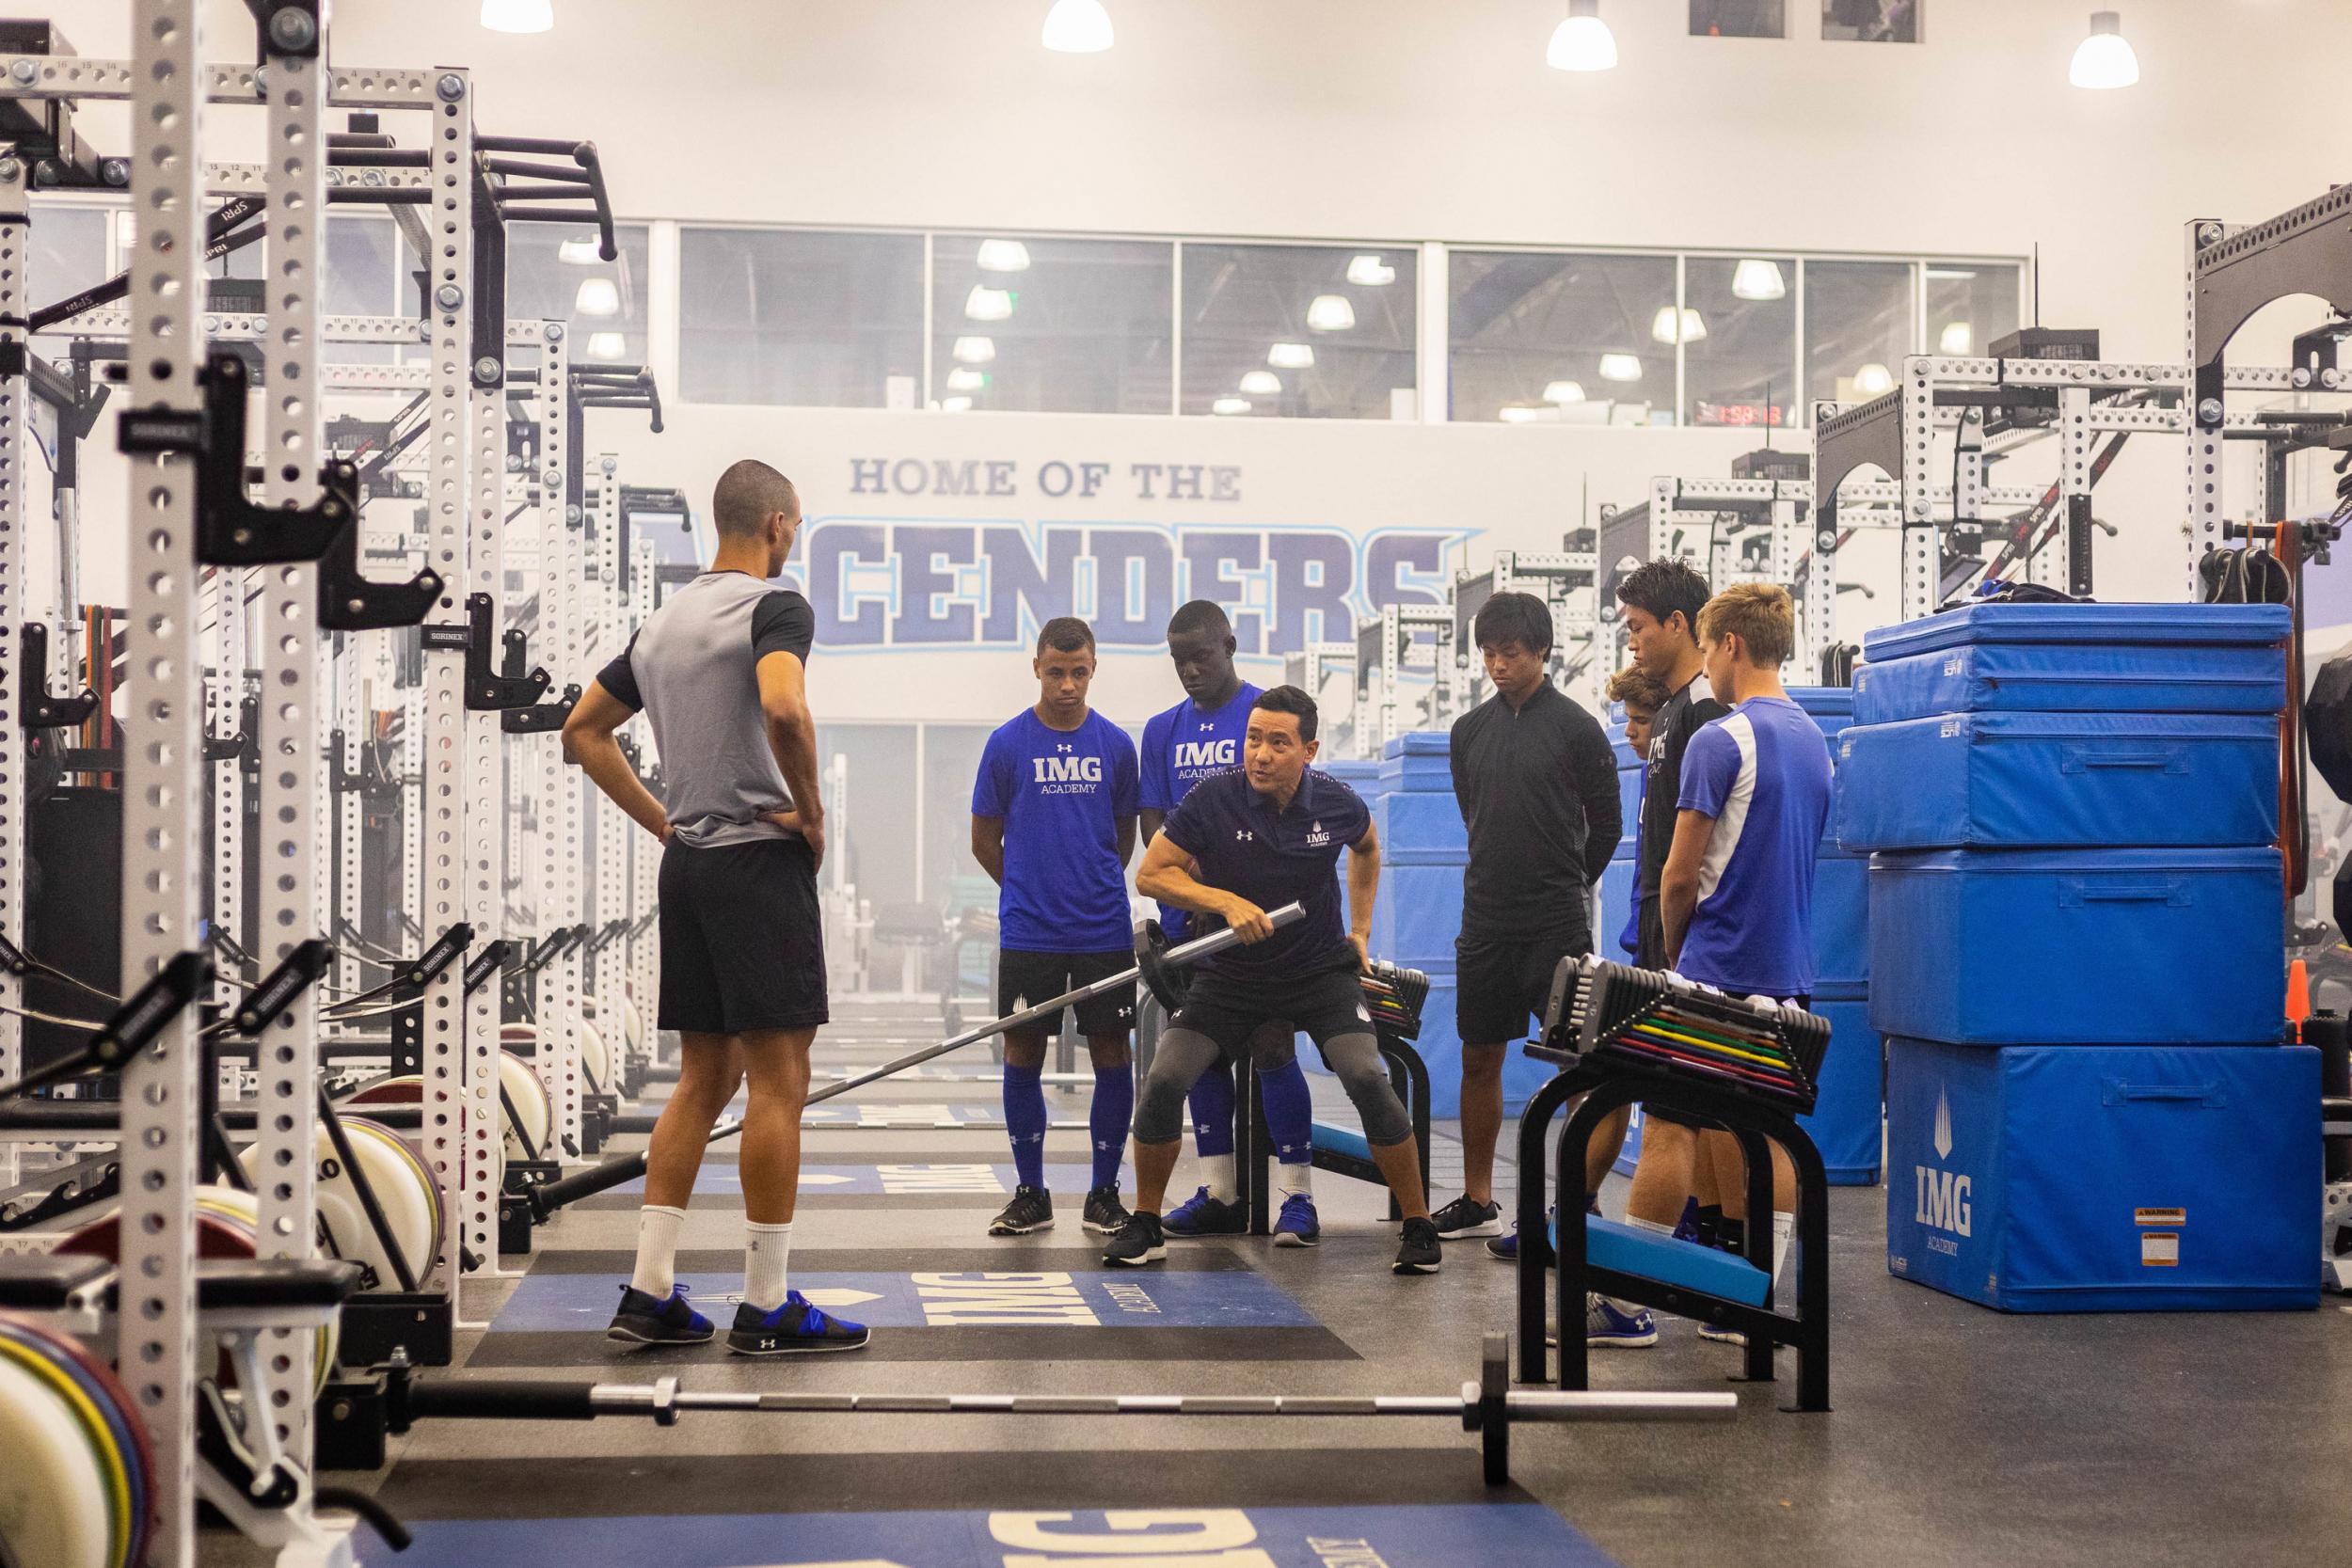 img academy strength & conditioning